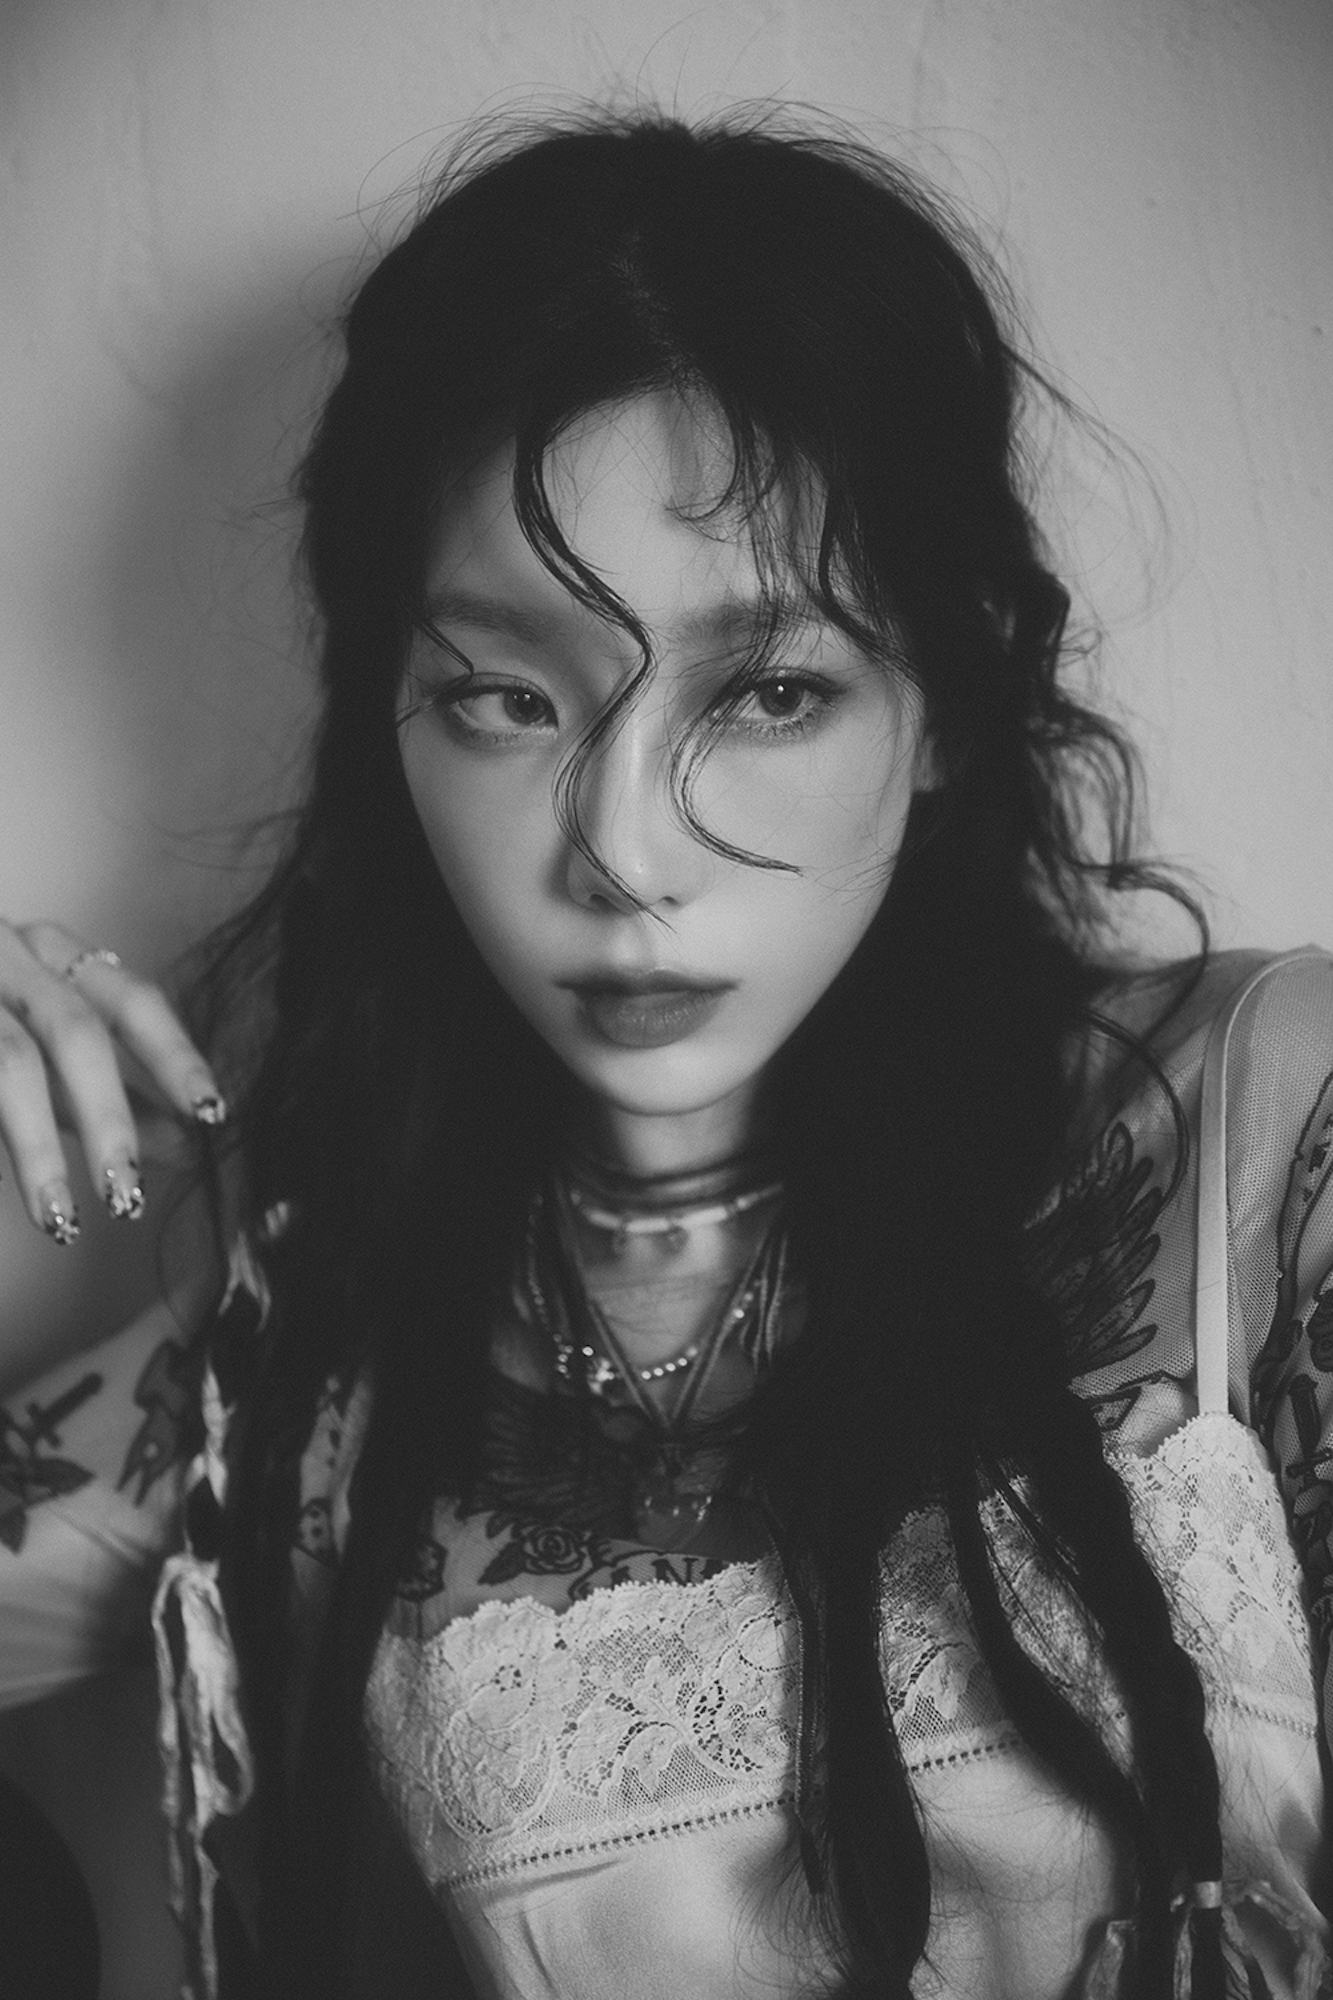 Taeyeon’s “To.X” & 9 Other New Songs Out This Week